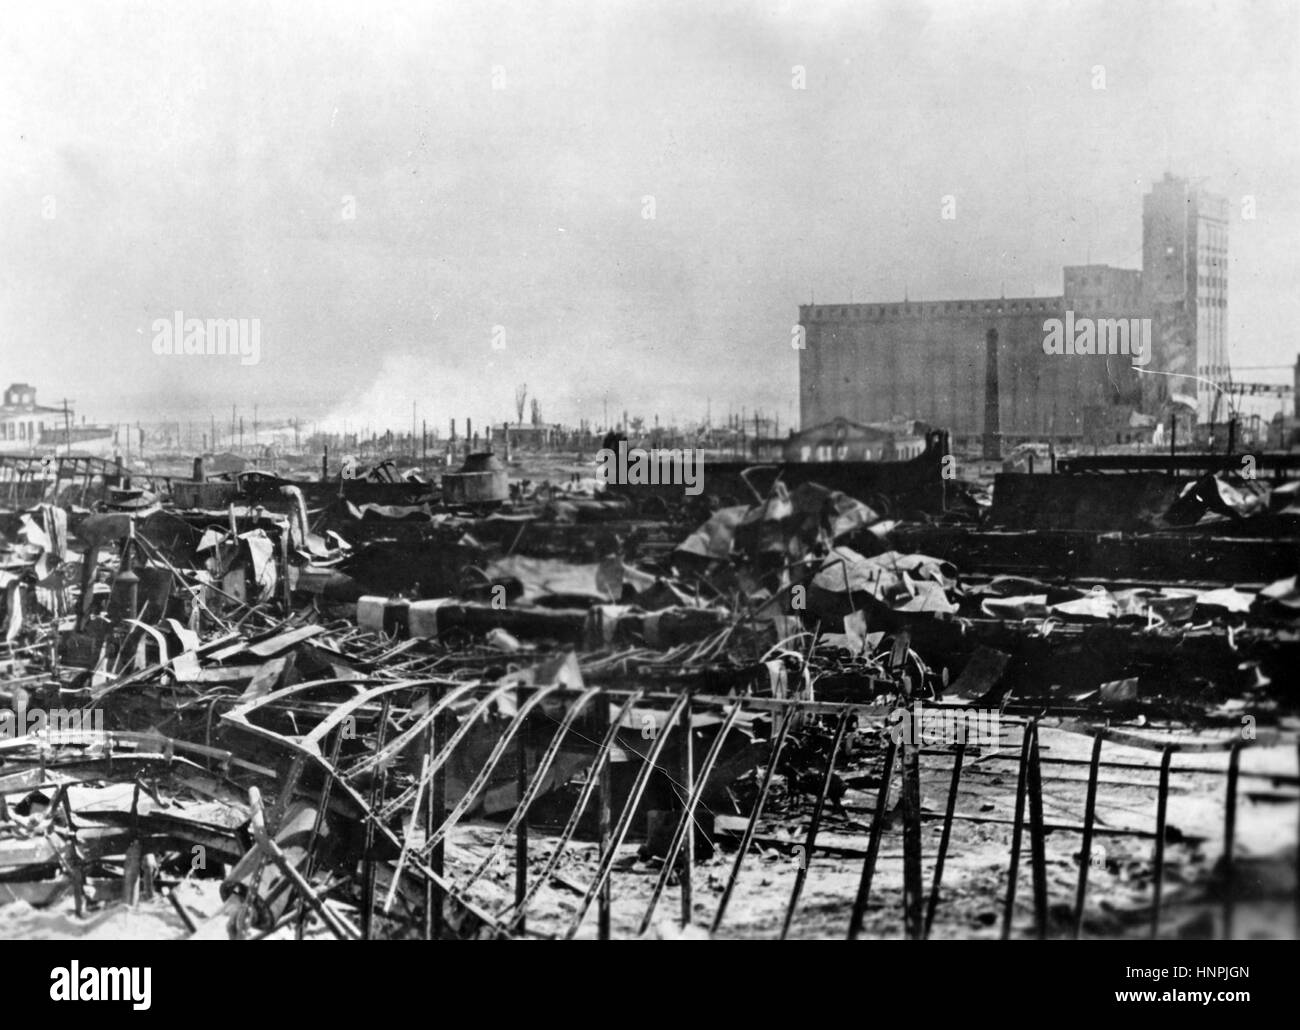 The Nazi propaganda image shows Stalingrad's (today Volgograd) southern railway station and grain silo destroyed by German aerial attacks. Taken in October 1942 after its defeat by the German Wehrmacht. A Nazi reporter has written on the reverse of the picture on 18.10.1942, 'After the bomb attacks on the railway yard in Stalingrad. Every report from the High Command has highlighted the outstanding performance of the German Air Force during the intense fighting over Stalingrad. Every hour fighter jets swoop down and unleash enormous destruction on this pocket of resistance. - This is Stalingra Stock Photo